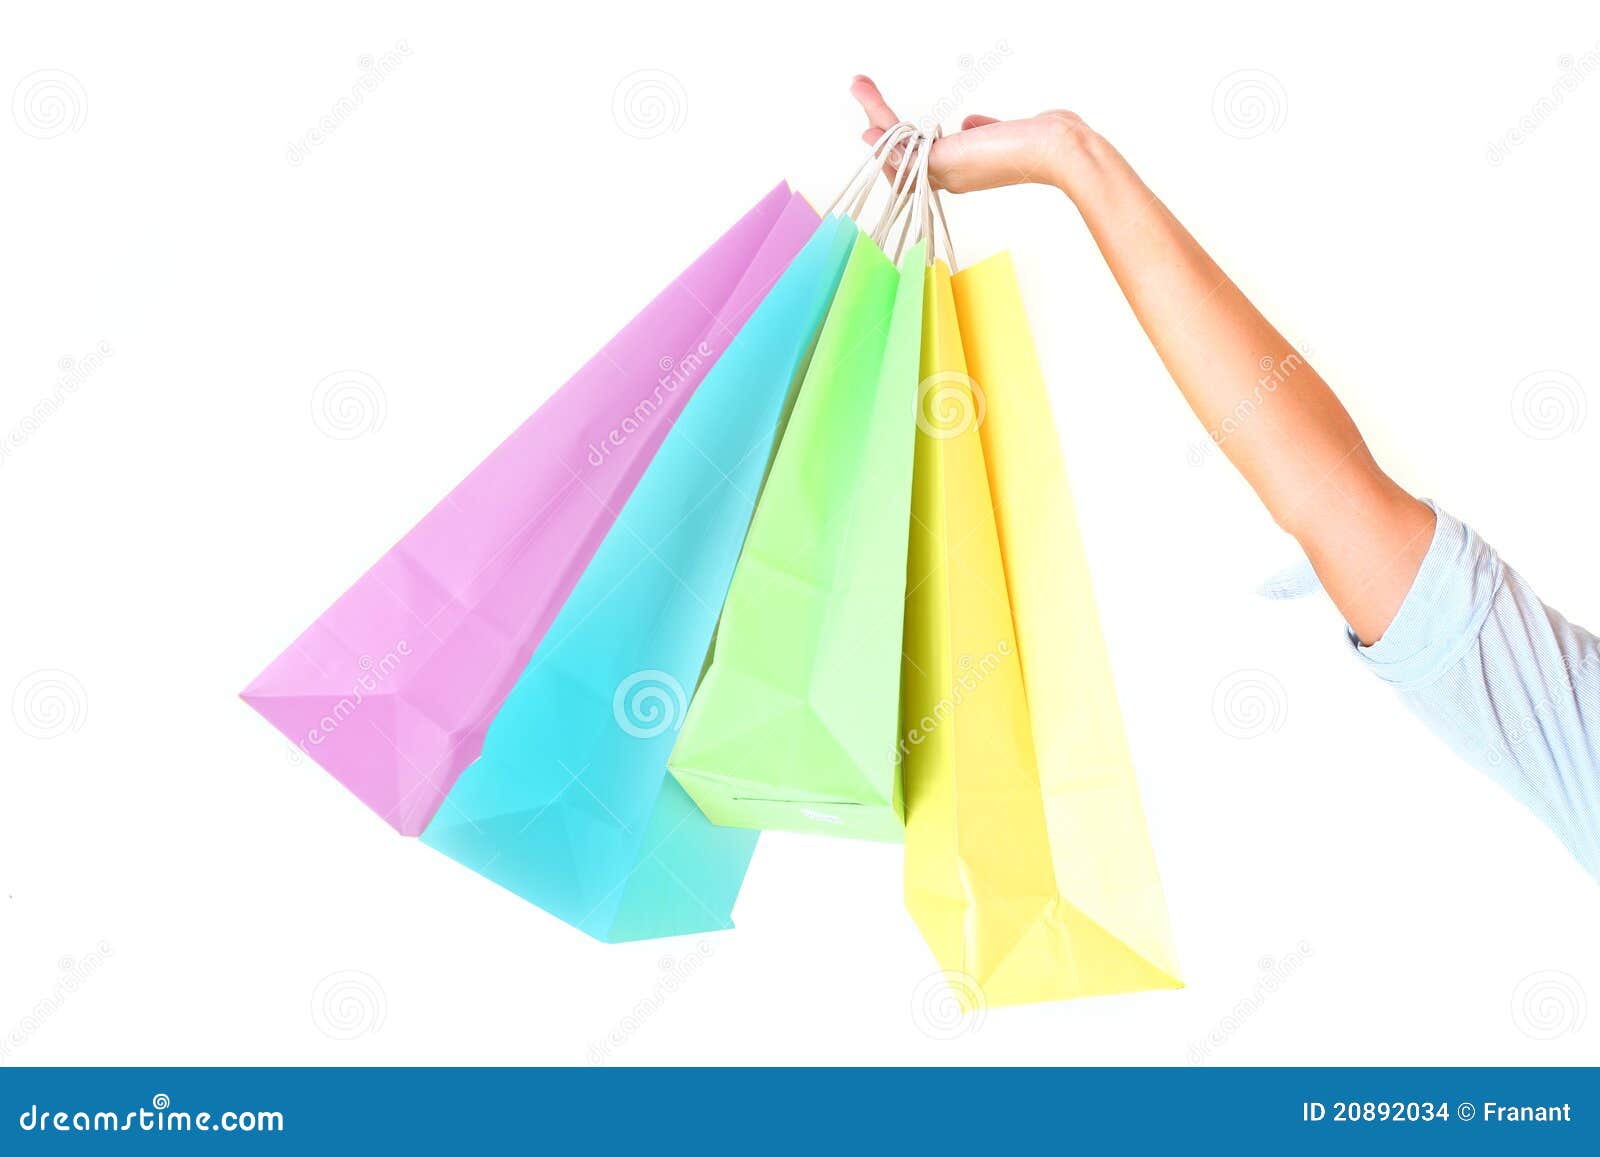 female's hand holding colorful shopping bags